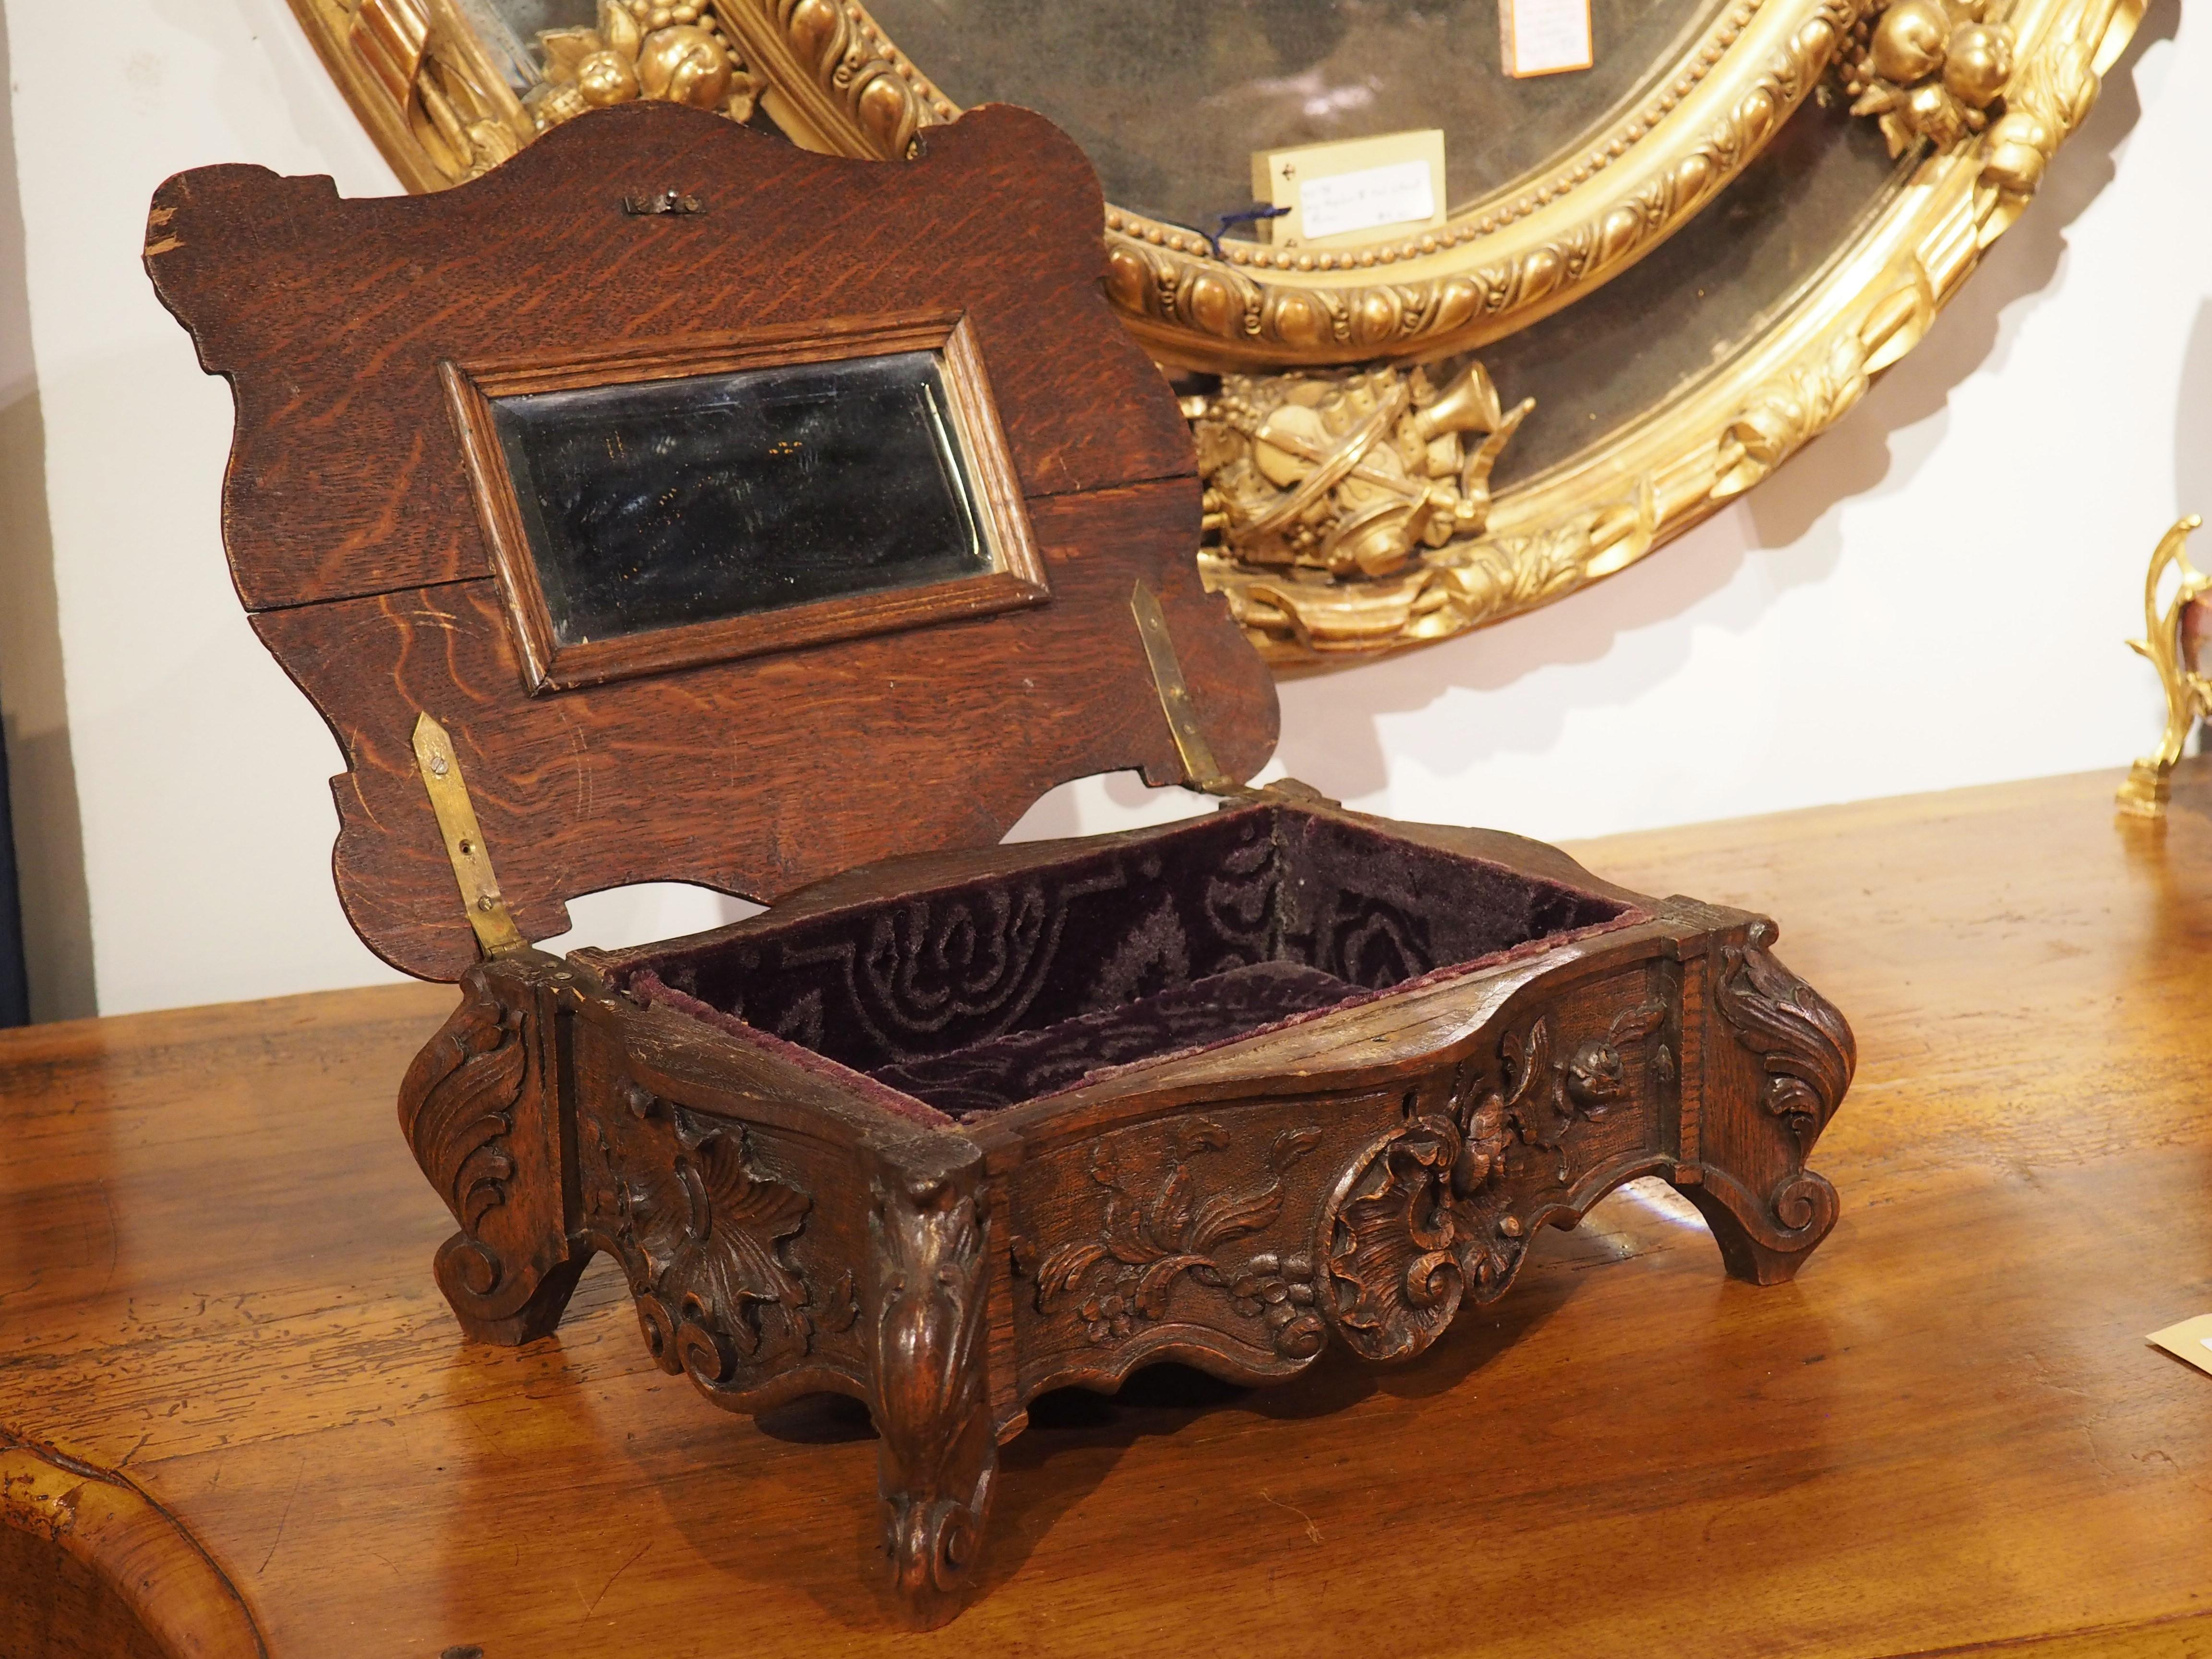 This beautifully carved oak box is perfect for storing small valuables and jewelry.  Crafted in France in the latter half of the 1800s,  this decorative box stands on acanthus carved legs terminating in scrolled feet. The high quality carving adorns